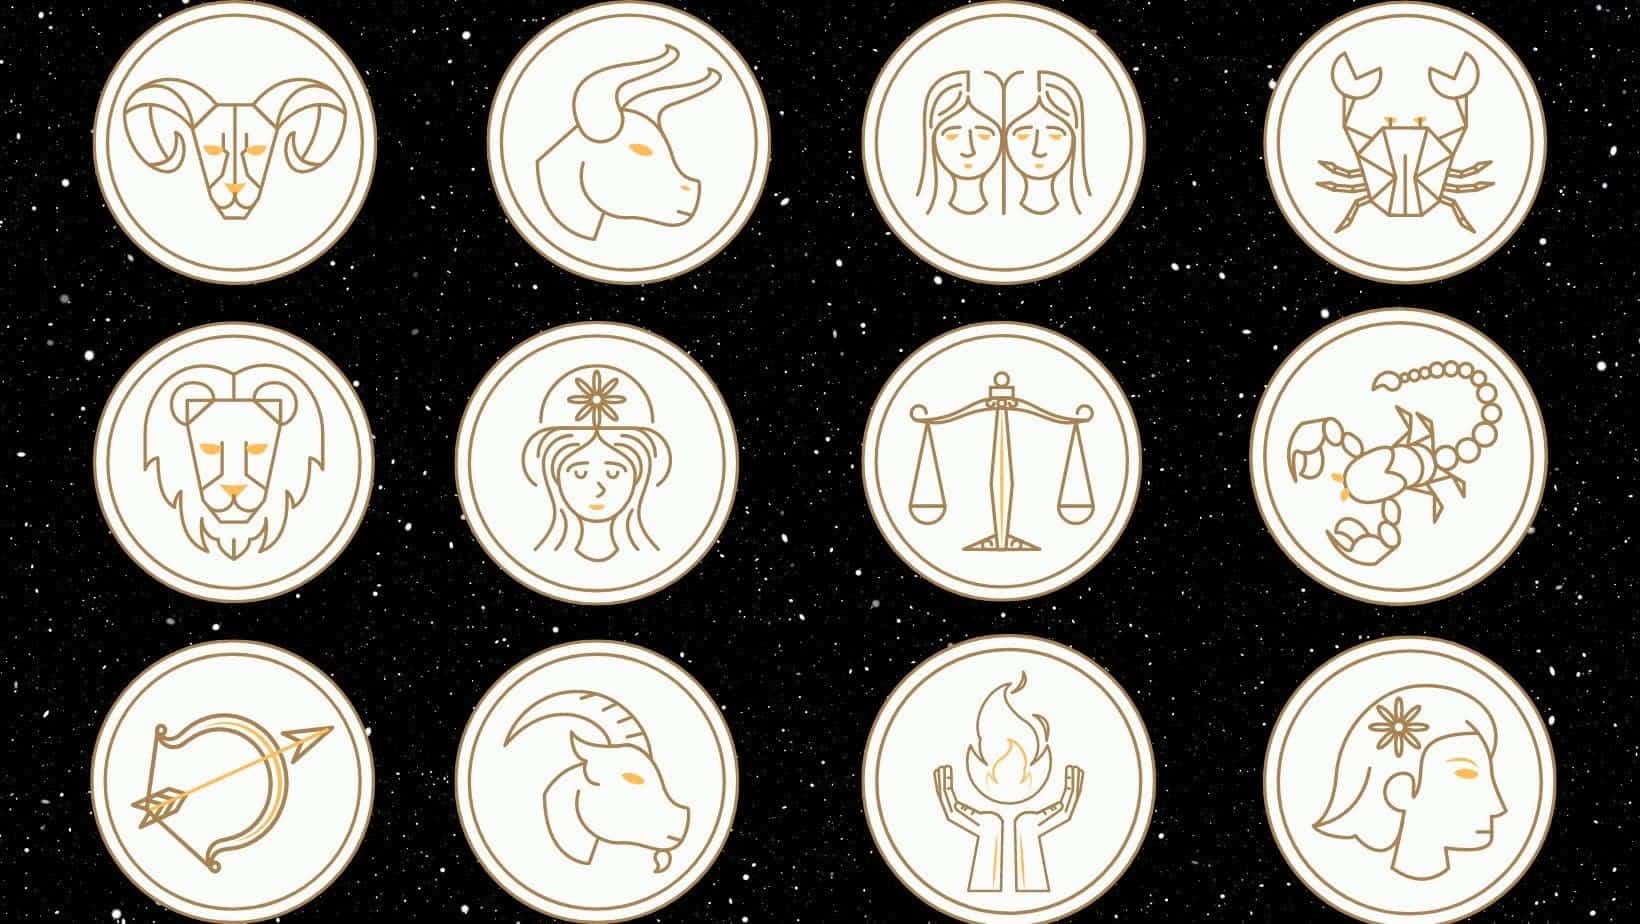 Your Zodiac Monthly Horoscope May 2021 According to Astrologer